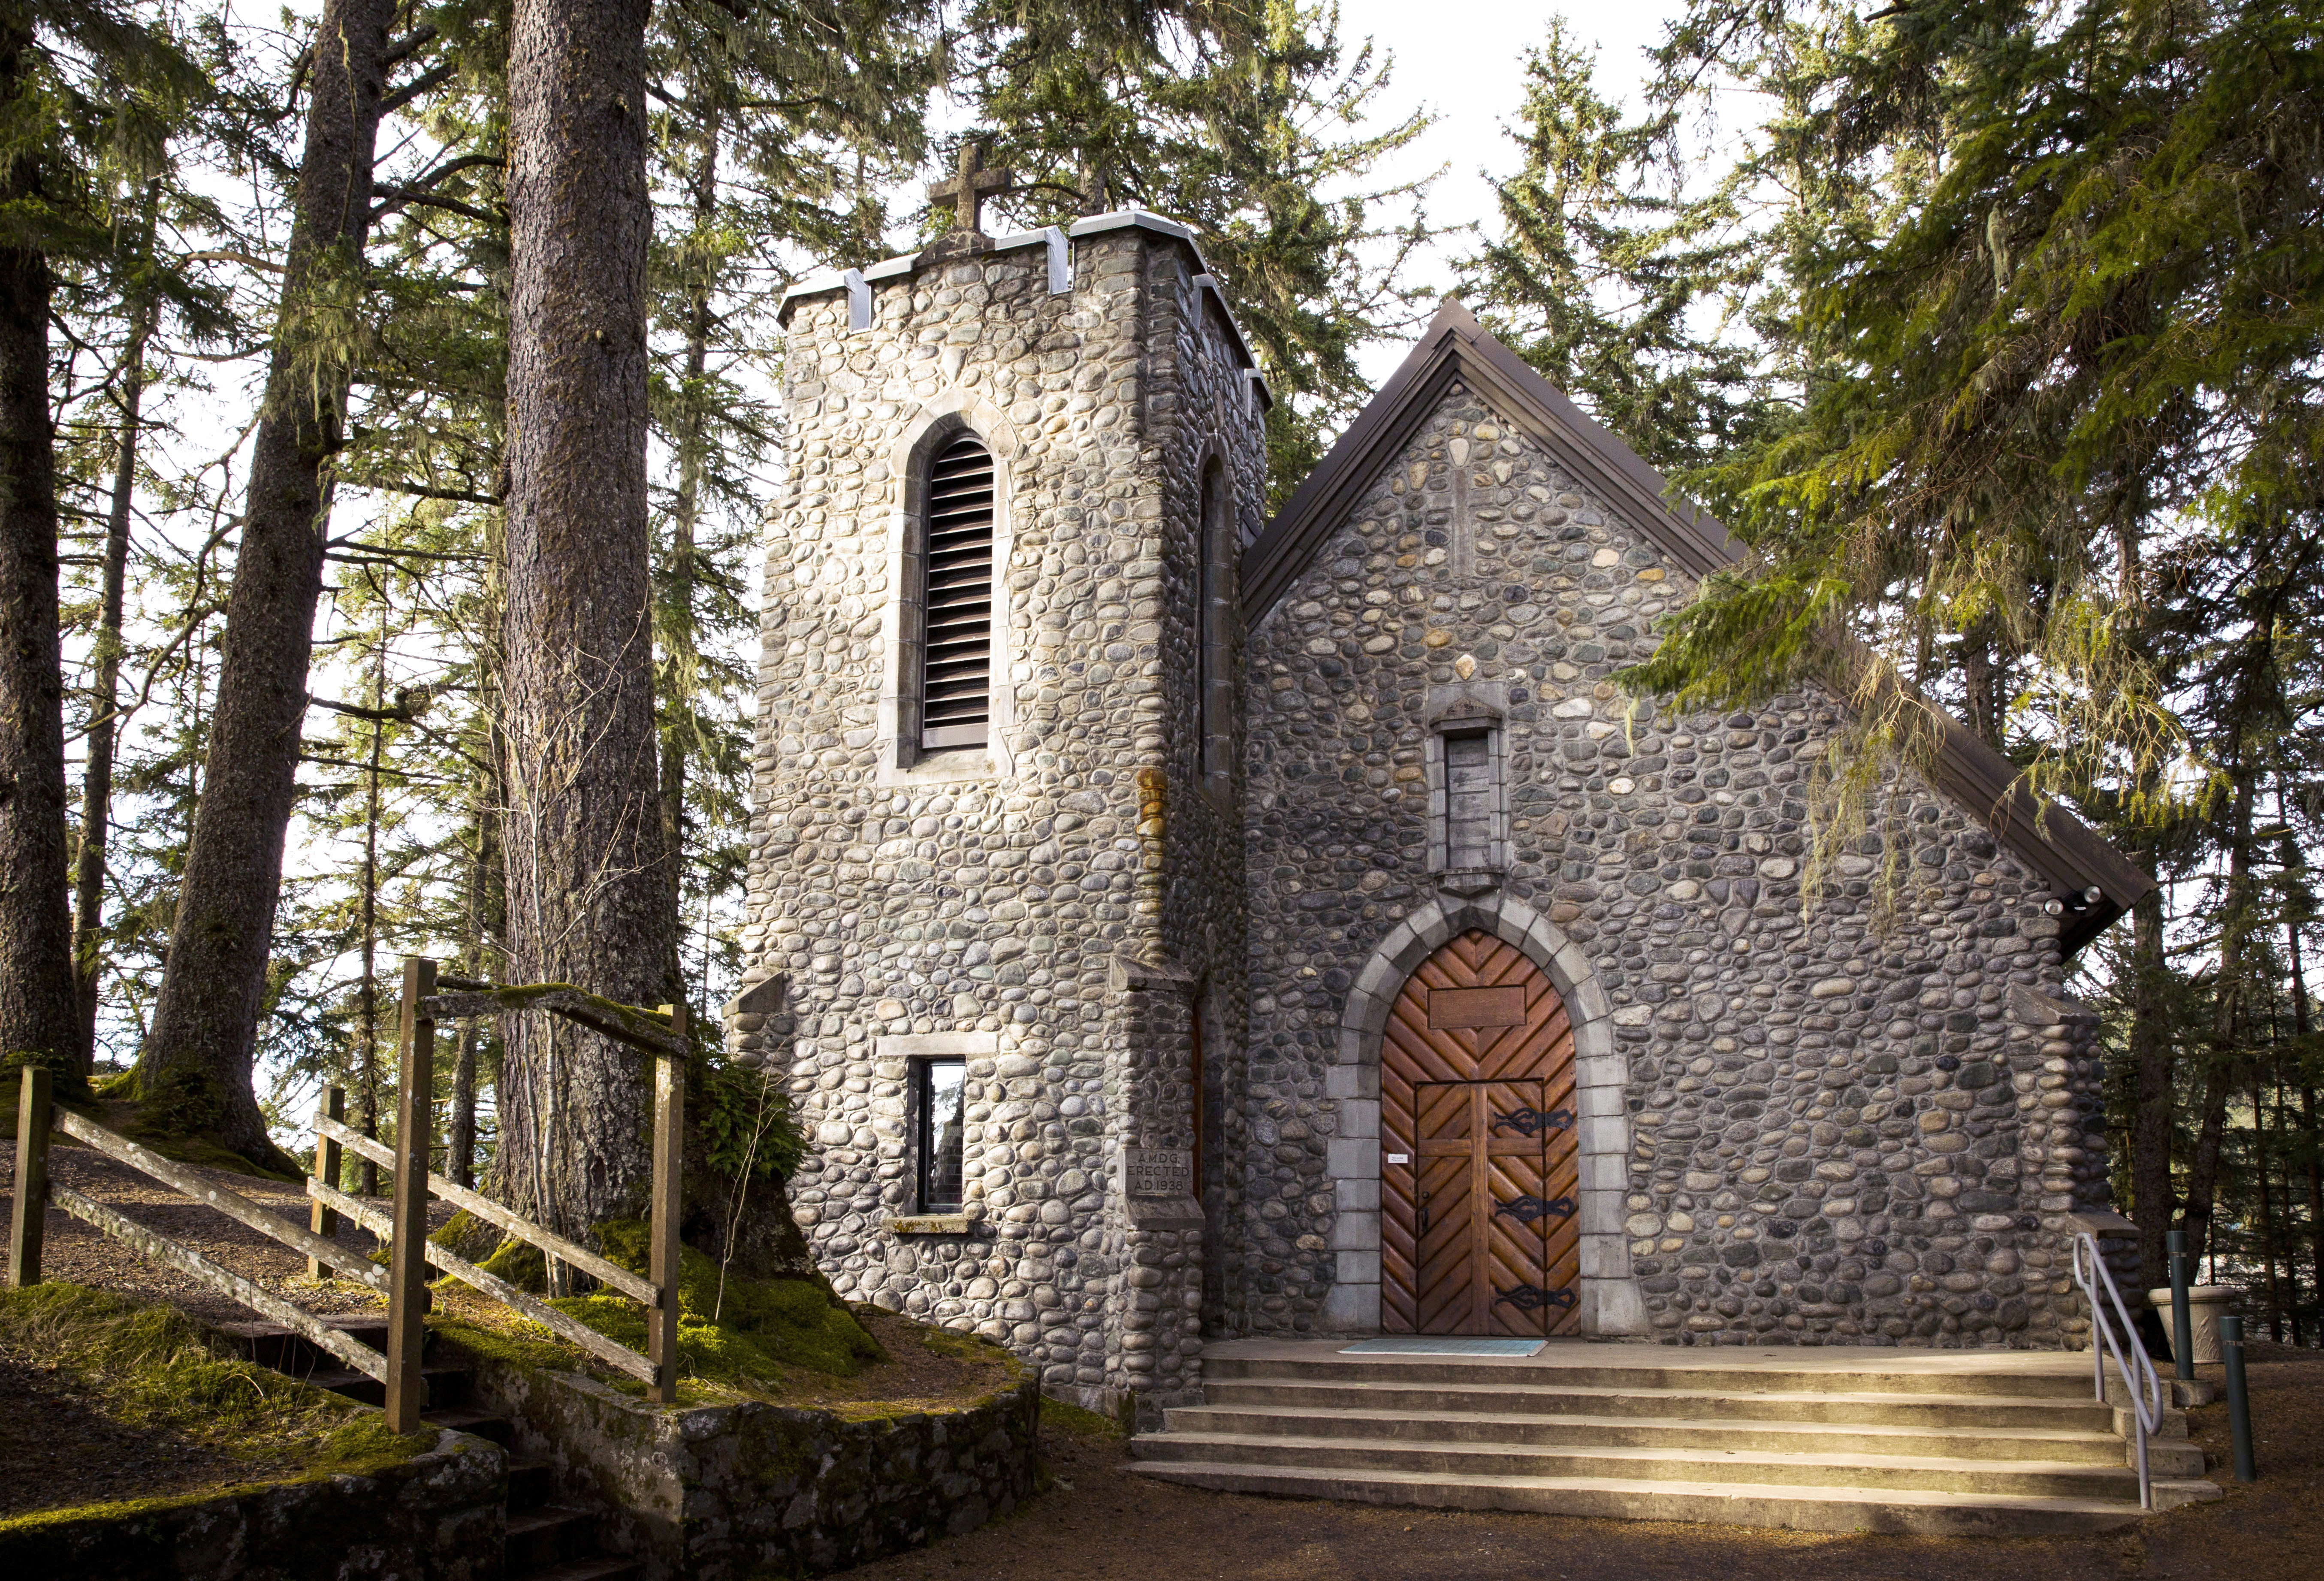 The chapel at the Shrine of St. Therese in Juneau, Alaska, seen in a 2014 photo, is constructed of beach stone plucked from the surrounding shoreline. The place of retreat with breathtaking views was designated a national shrine by the U.S. bishops Oct. 1. (CNS photo/Nancy Wiechec)